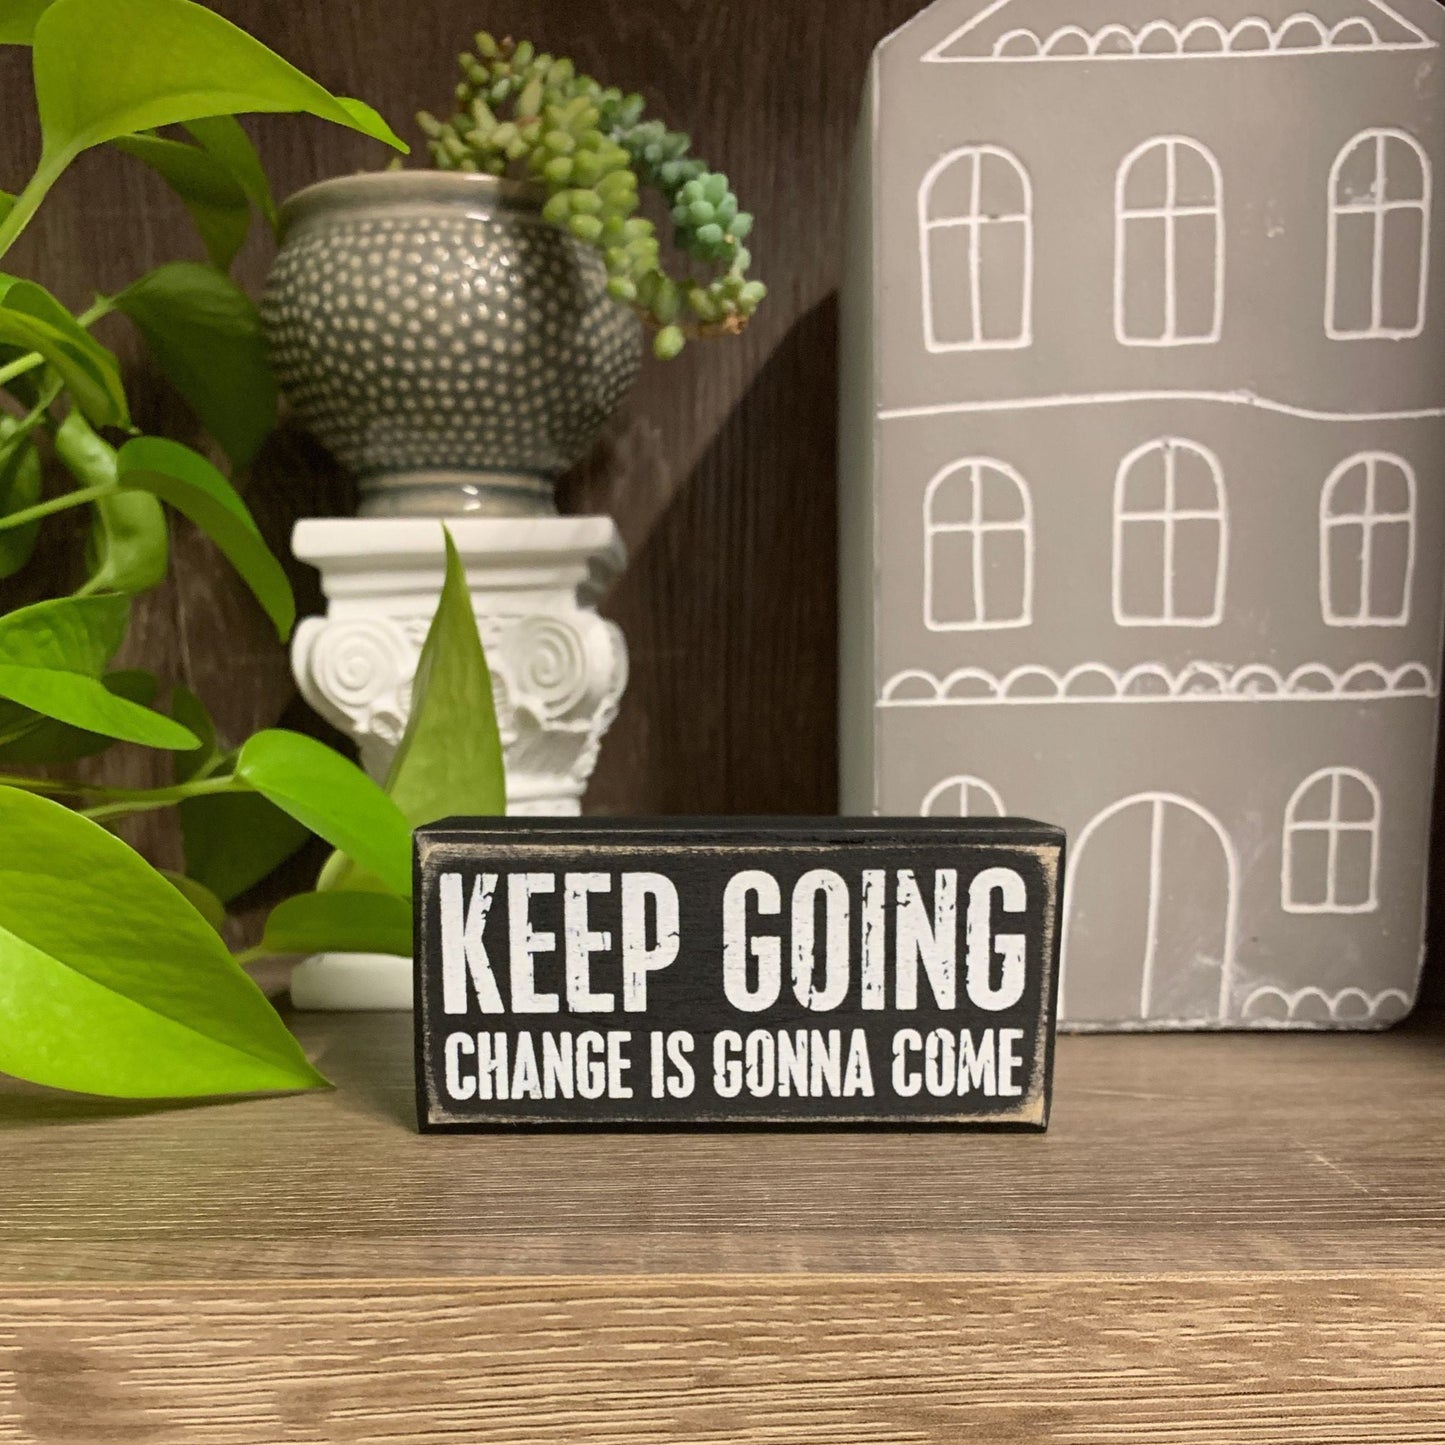 Keep Going Change Is Gonna Come Wooden Box Sign